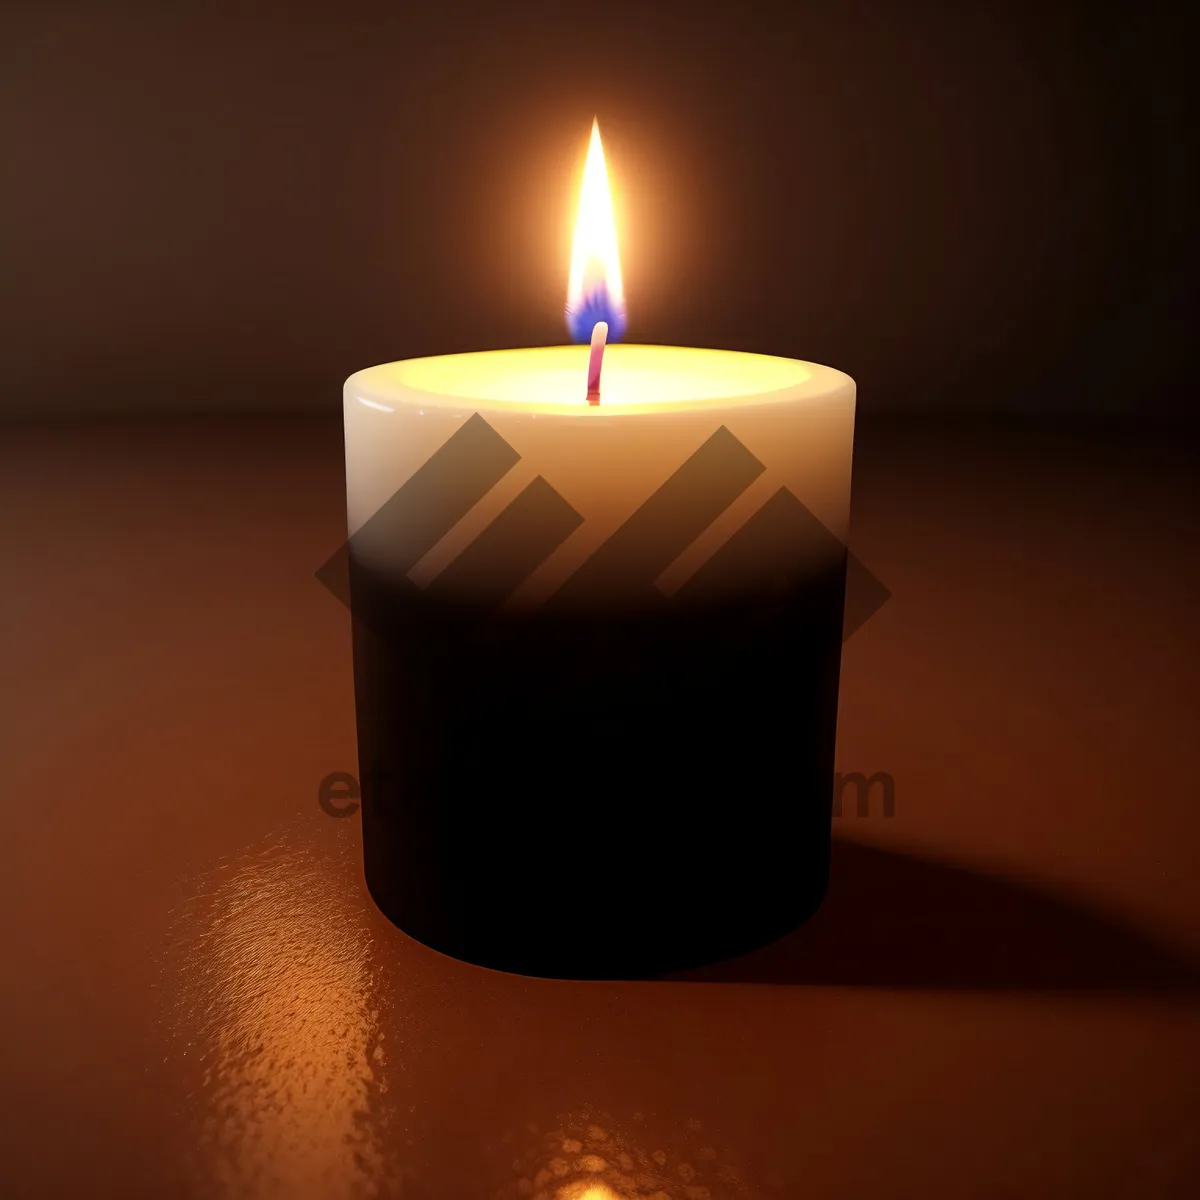 Picture of Calming Candlelight: A flickering flame for soothing relaxation.